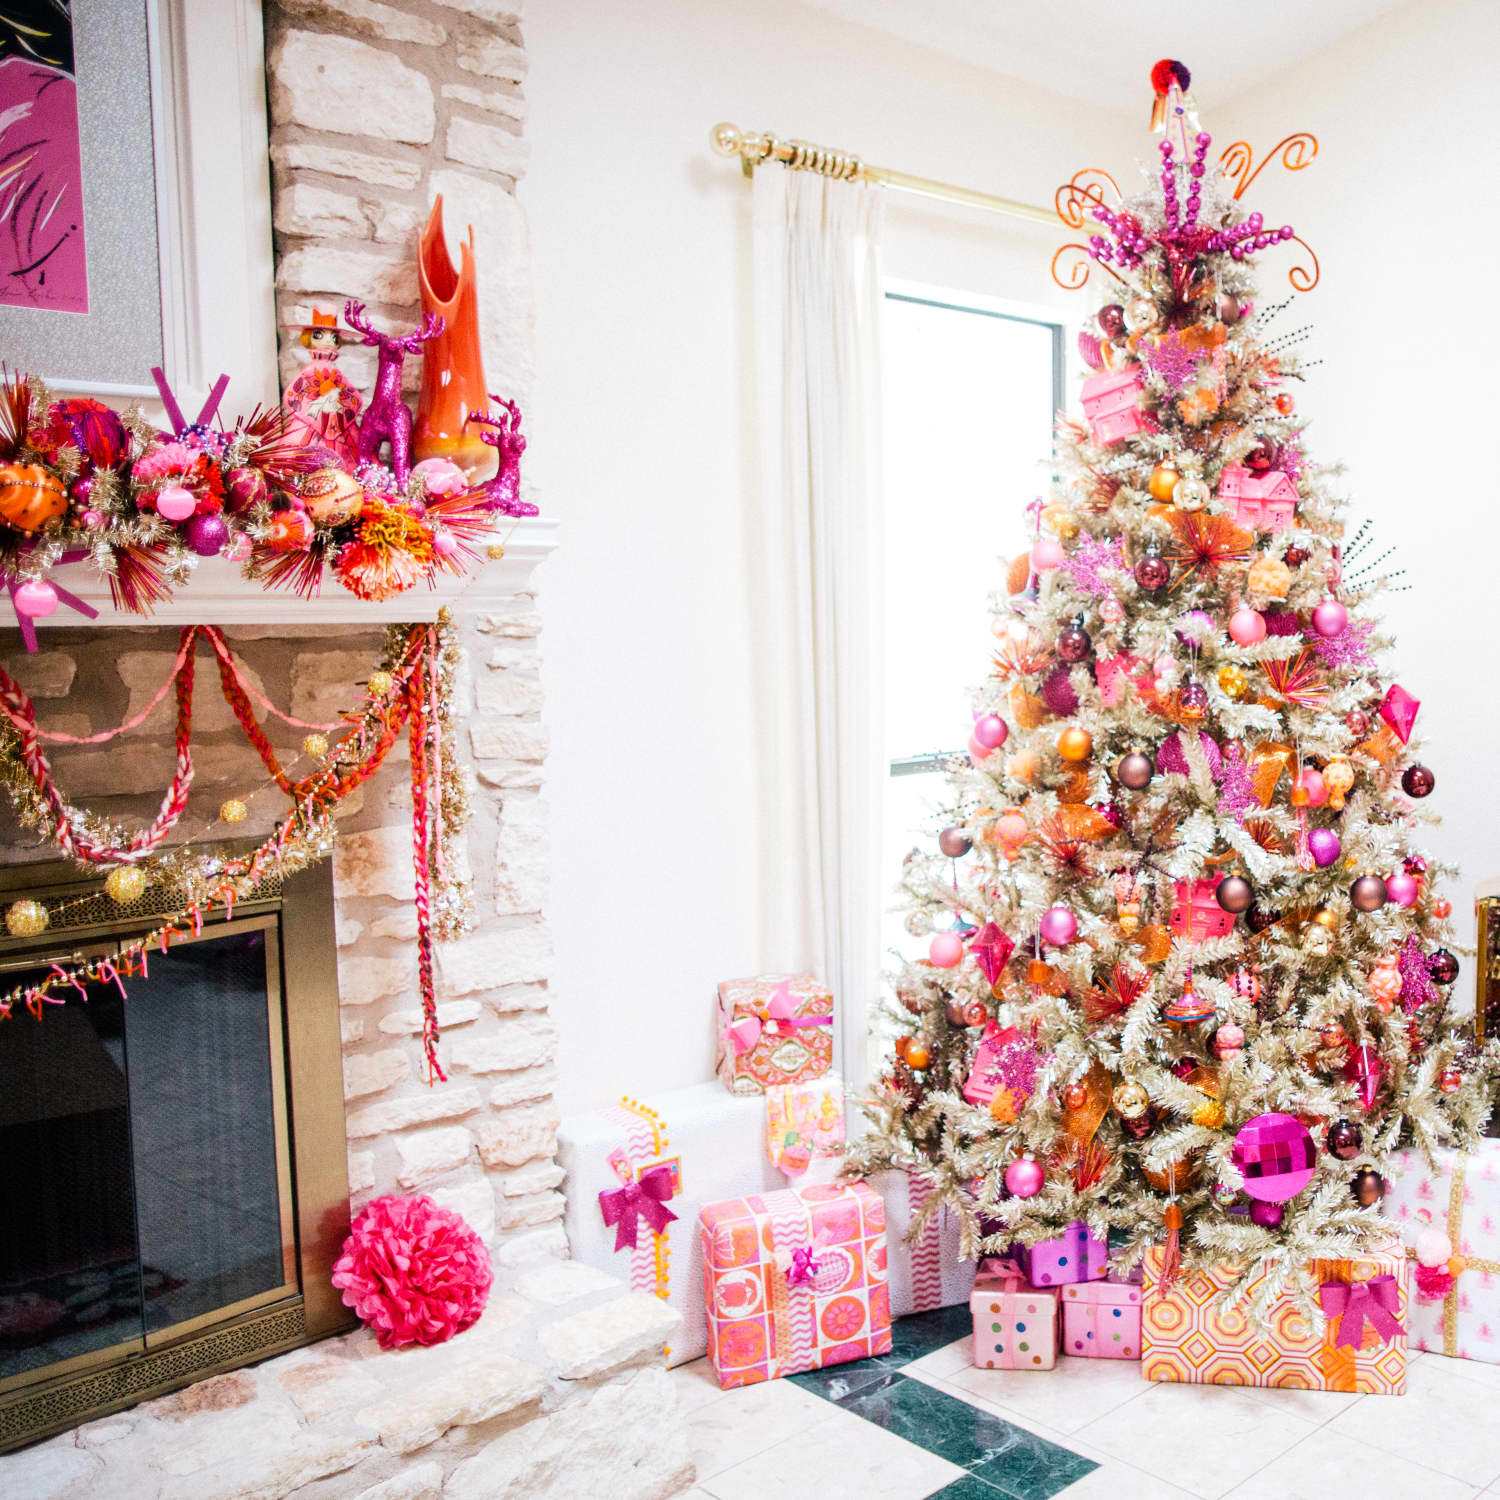 The Best Theme Christmas Tree Ideas to Take Your Decor Up a Notch This Holiday